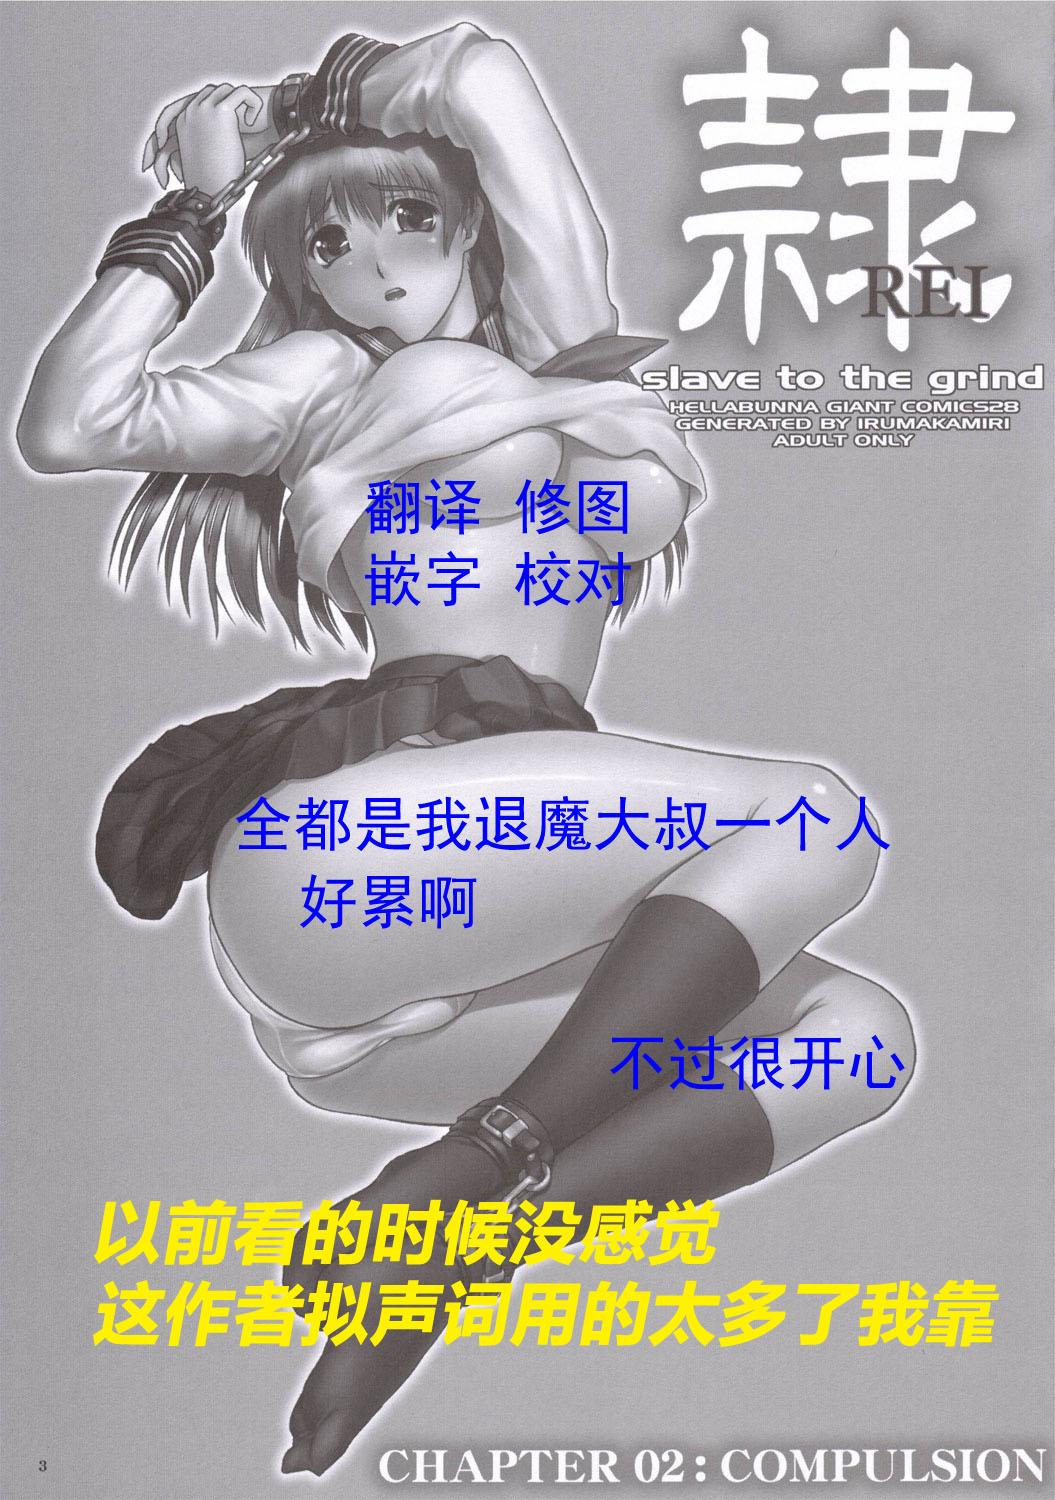 Sharing (C69) [Hellabunna (Iruma Kamiri)] REI - slave to the grind - CHAPTER 02: COMPULSION (Dead or Alive) [Chinese] [退魔大叔个人汉化] - Dead or alive Milfsex - Page 3